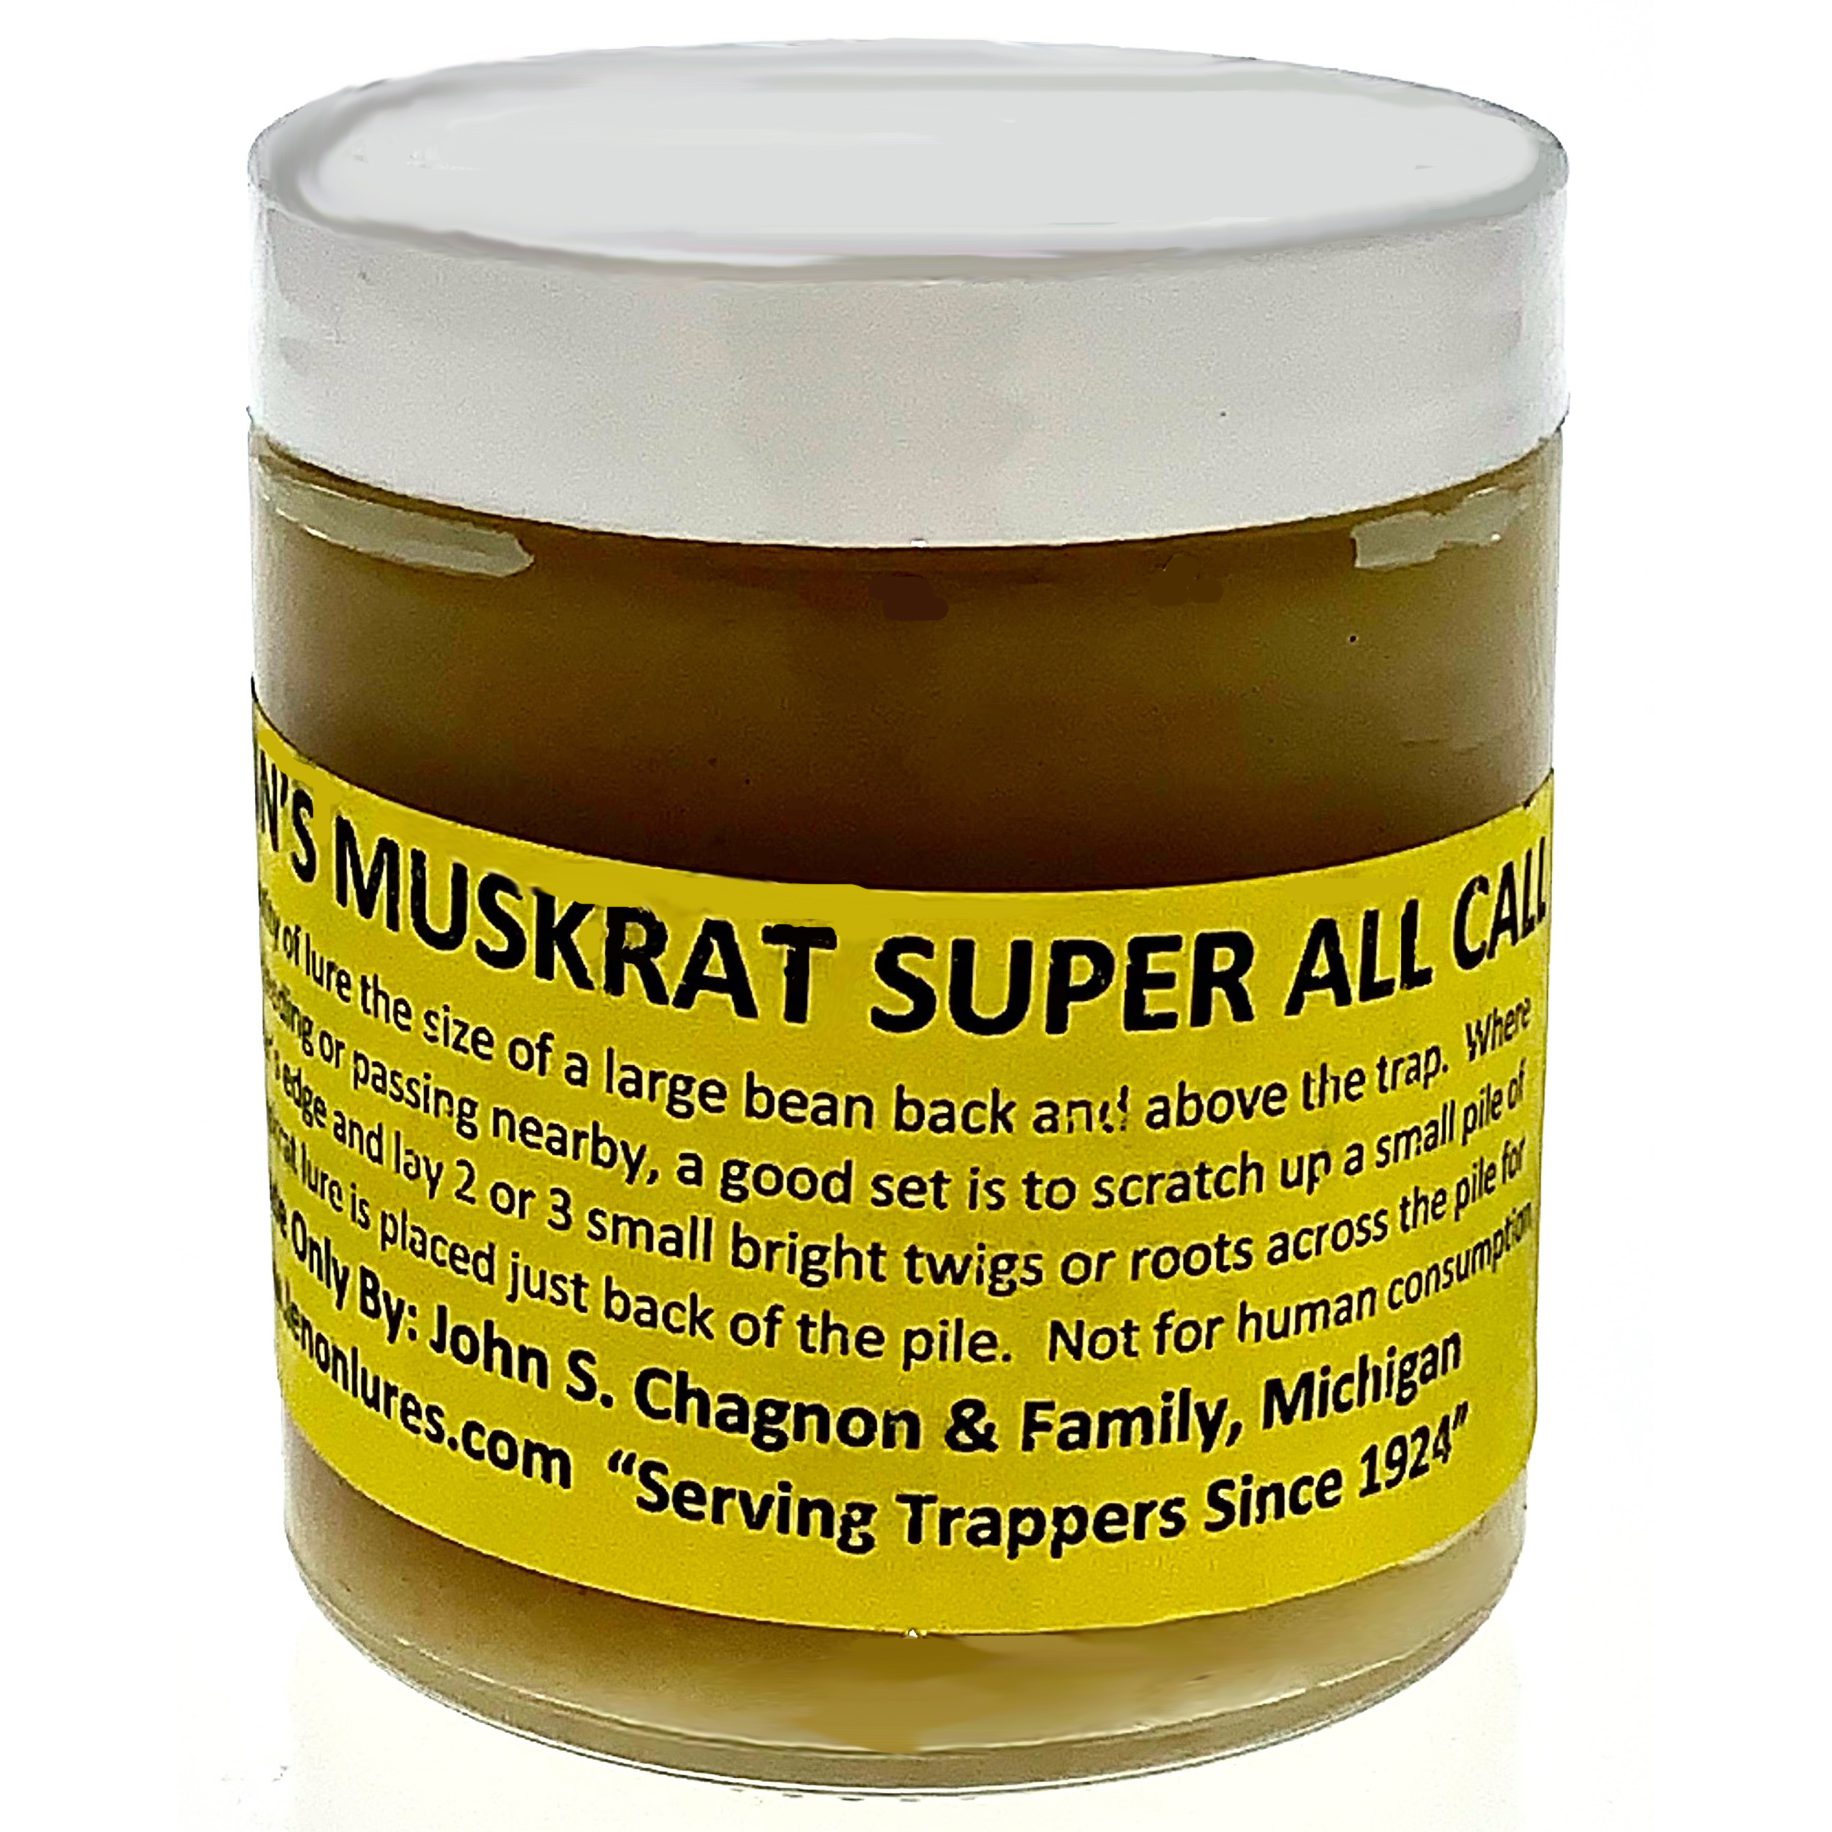 LENON'S MUSKRAT SUPER ALL CALL - MUSKRAT LURE / SCENT WORKS GREAT ON  MUSKRAT FLOATS AND FEED BEDS 4OZ